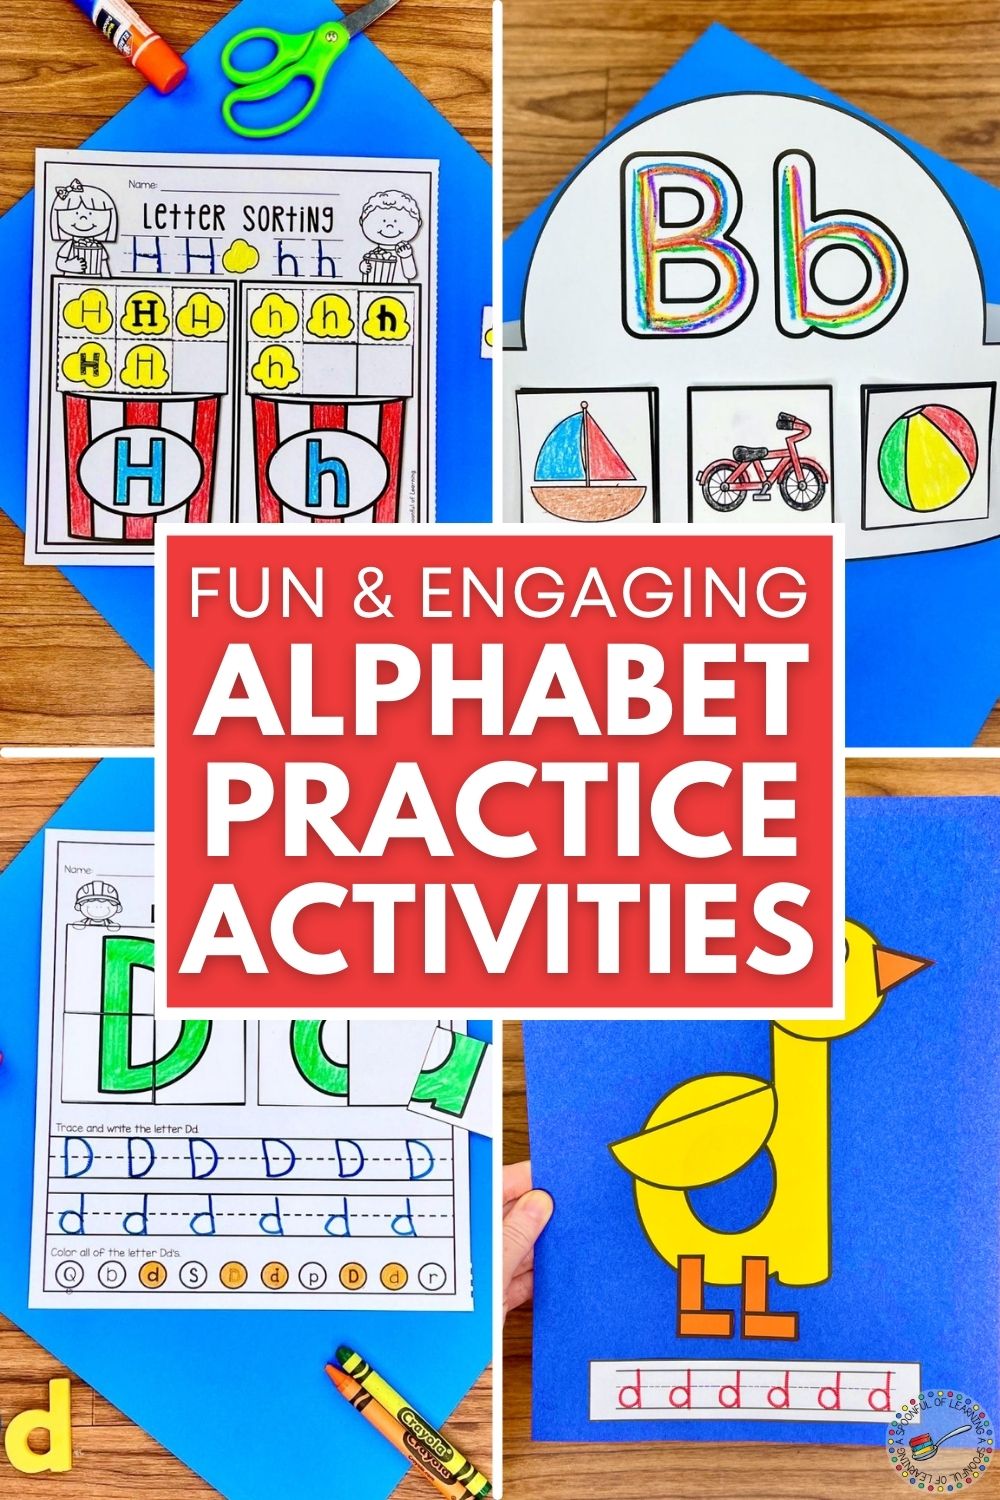 Alphabet Practice Activities that Students Love - A Spoonful of Learning